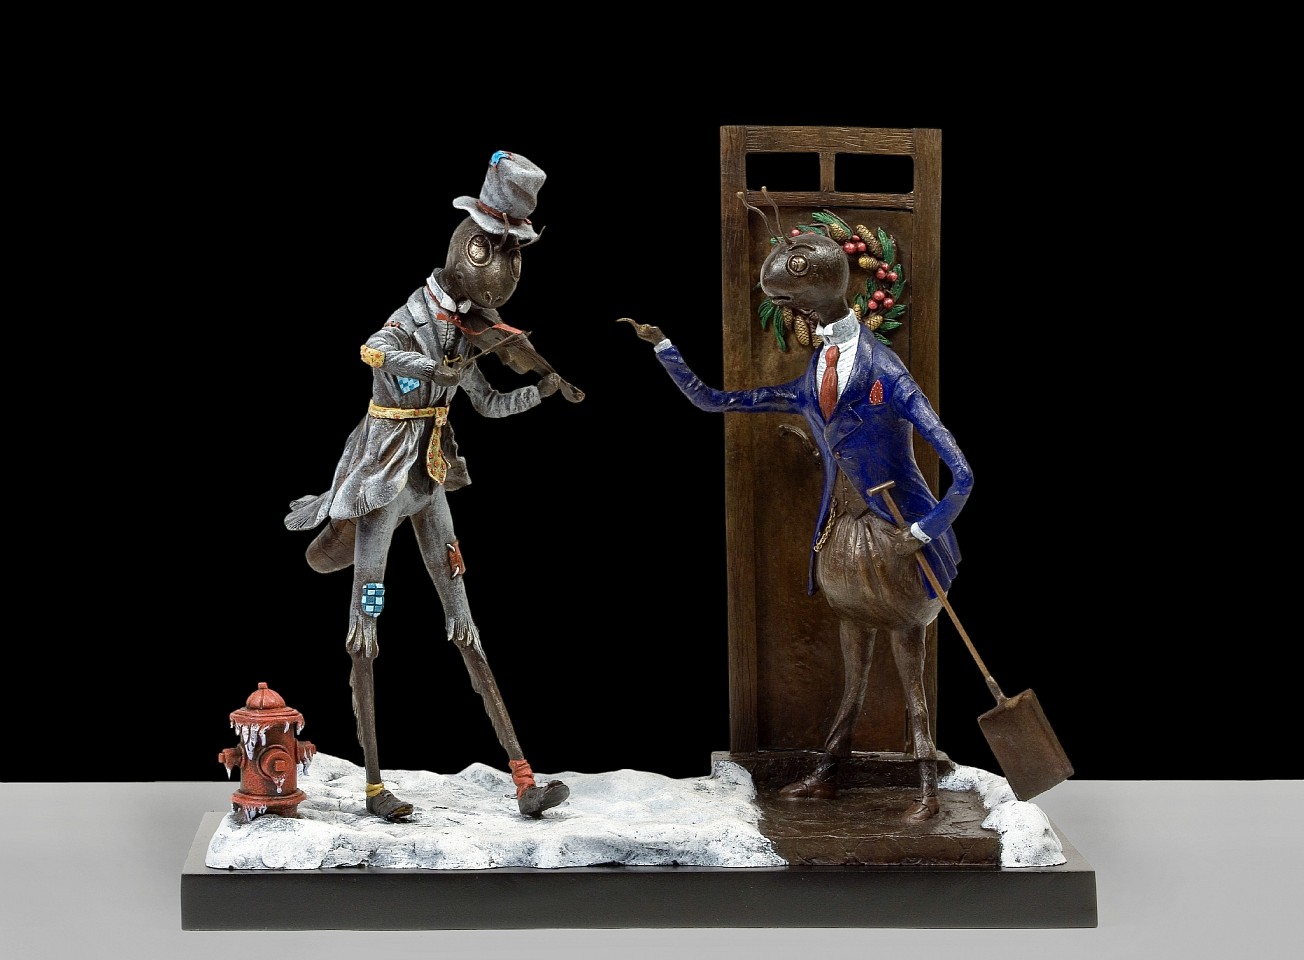 Bjorn Skaarup, The Grasshopper and the Ant, Ed. of 9, 2019
bronze with polychrome patina, 16 x 18 x 8 in. (40.6 x 45.7 x 20.3 cm)
BS190601